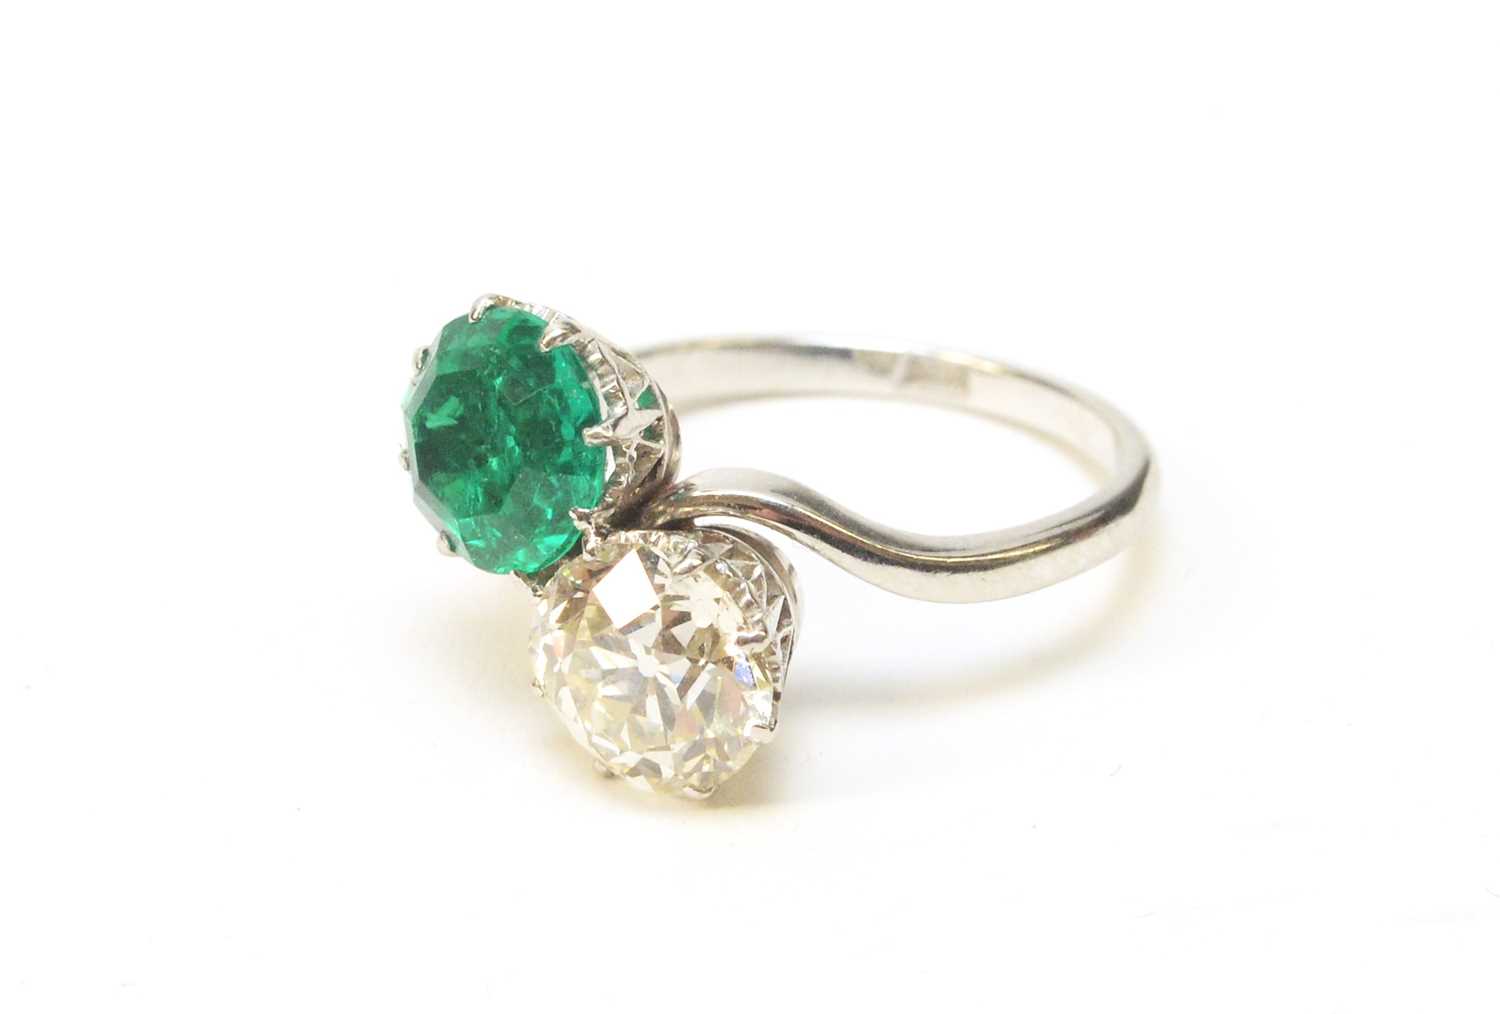 8 - A Colombian emerald and diamond ring